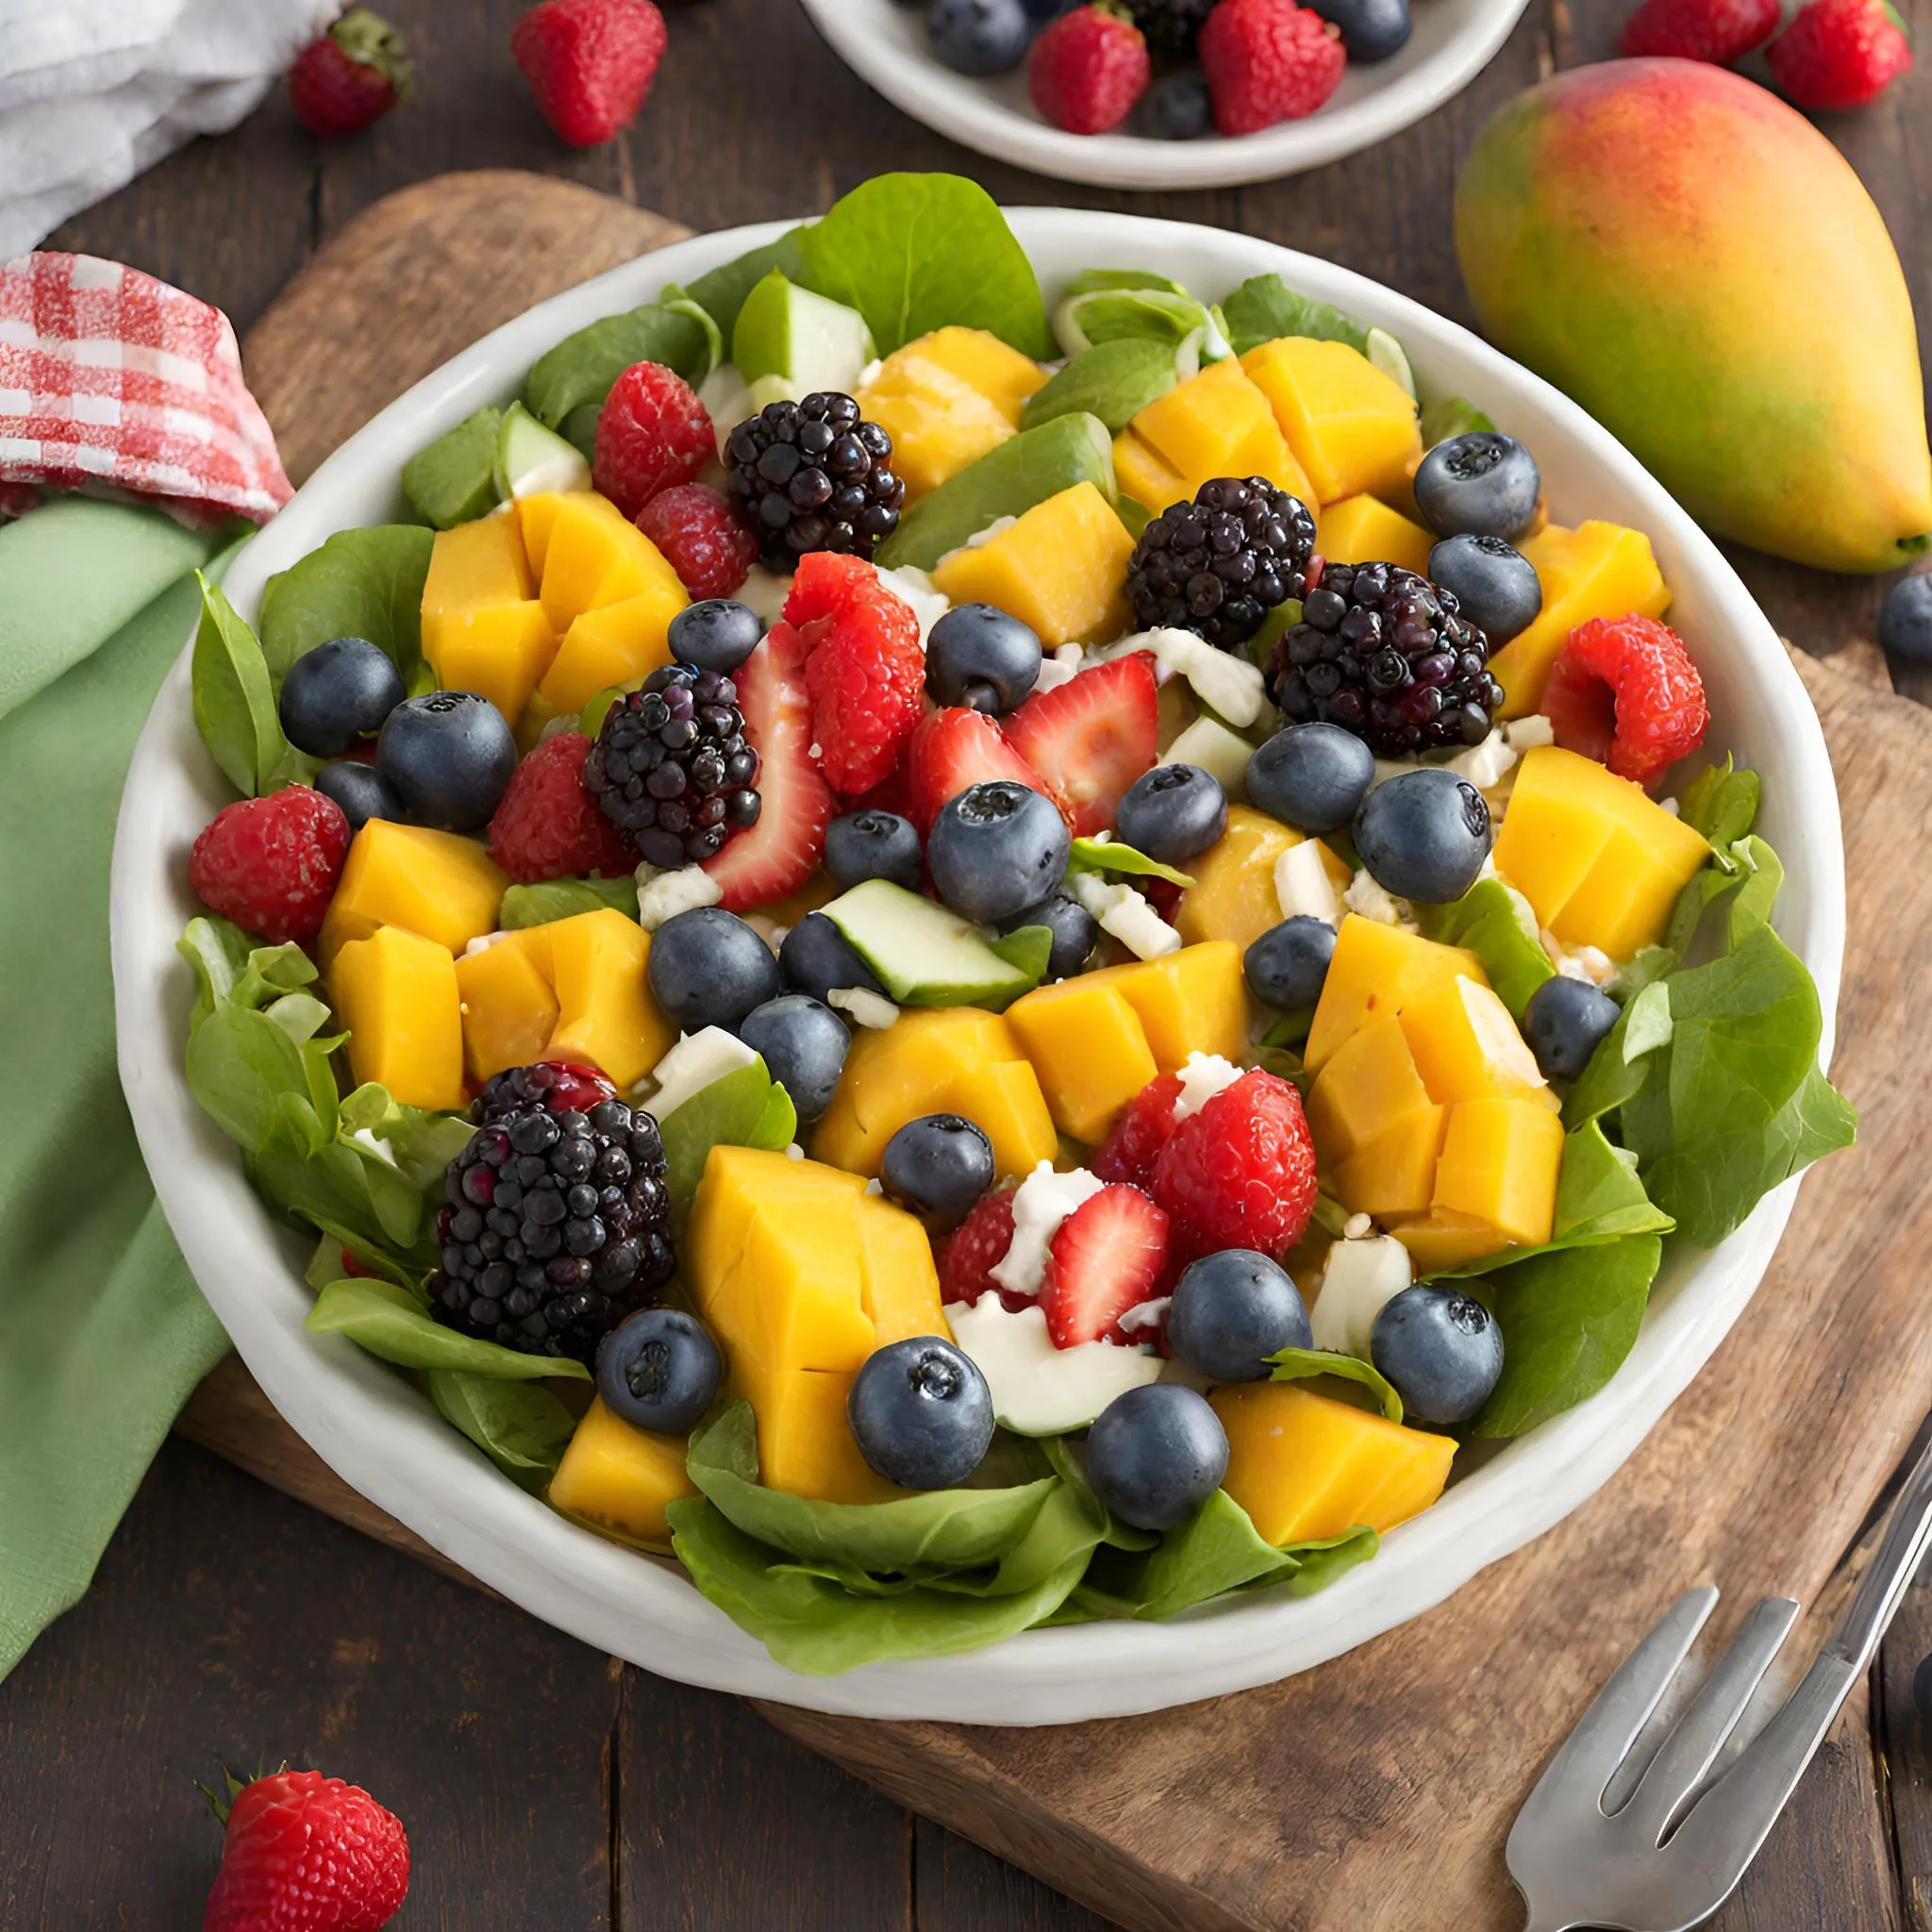 A white bowl filled with a variety of fruits and vegetables including mangoes, blueberries, raspberries, strawberries, cucumbers, and feta cheese.